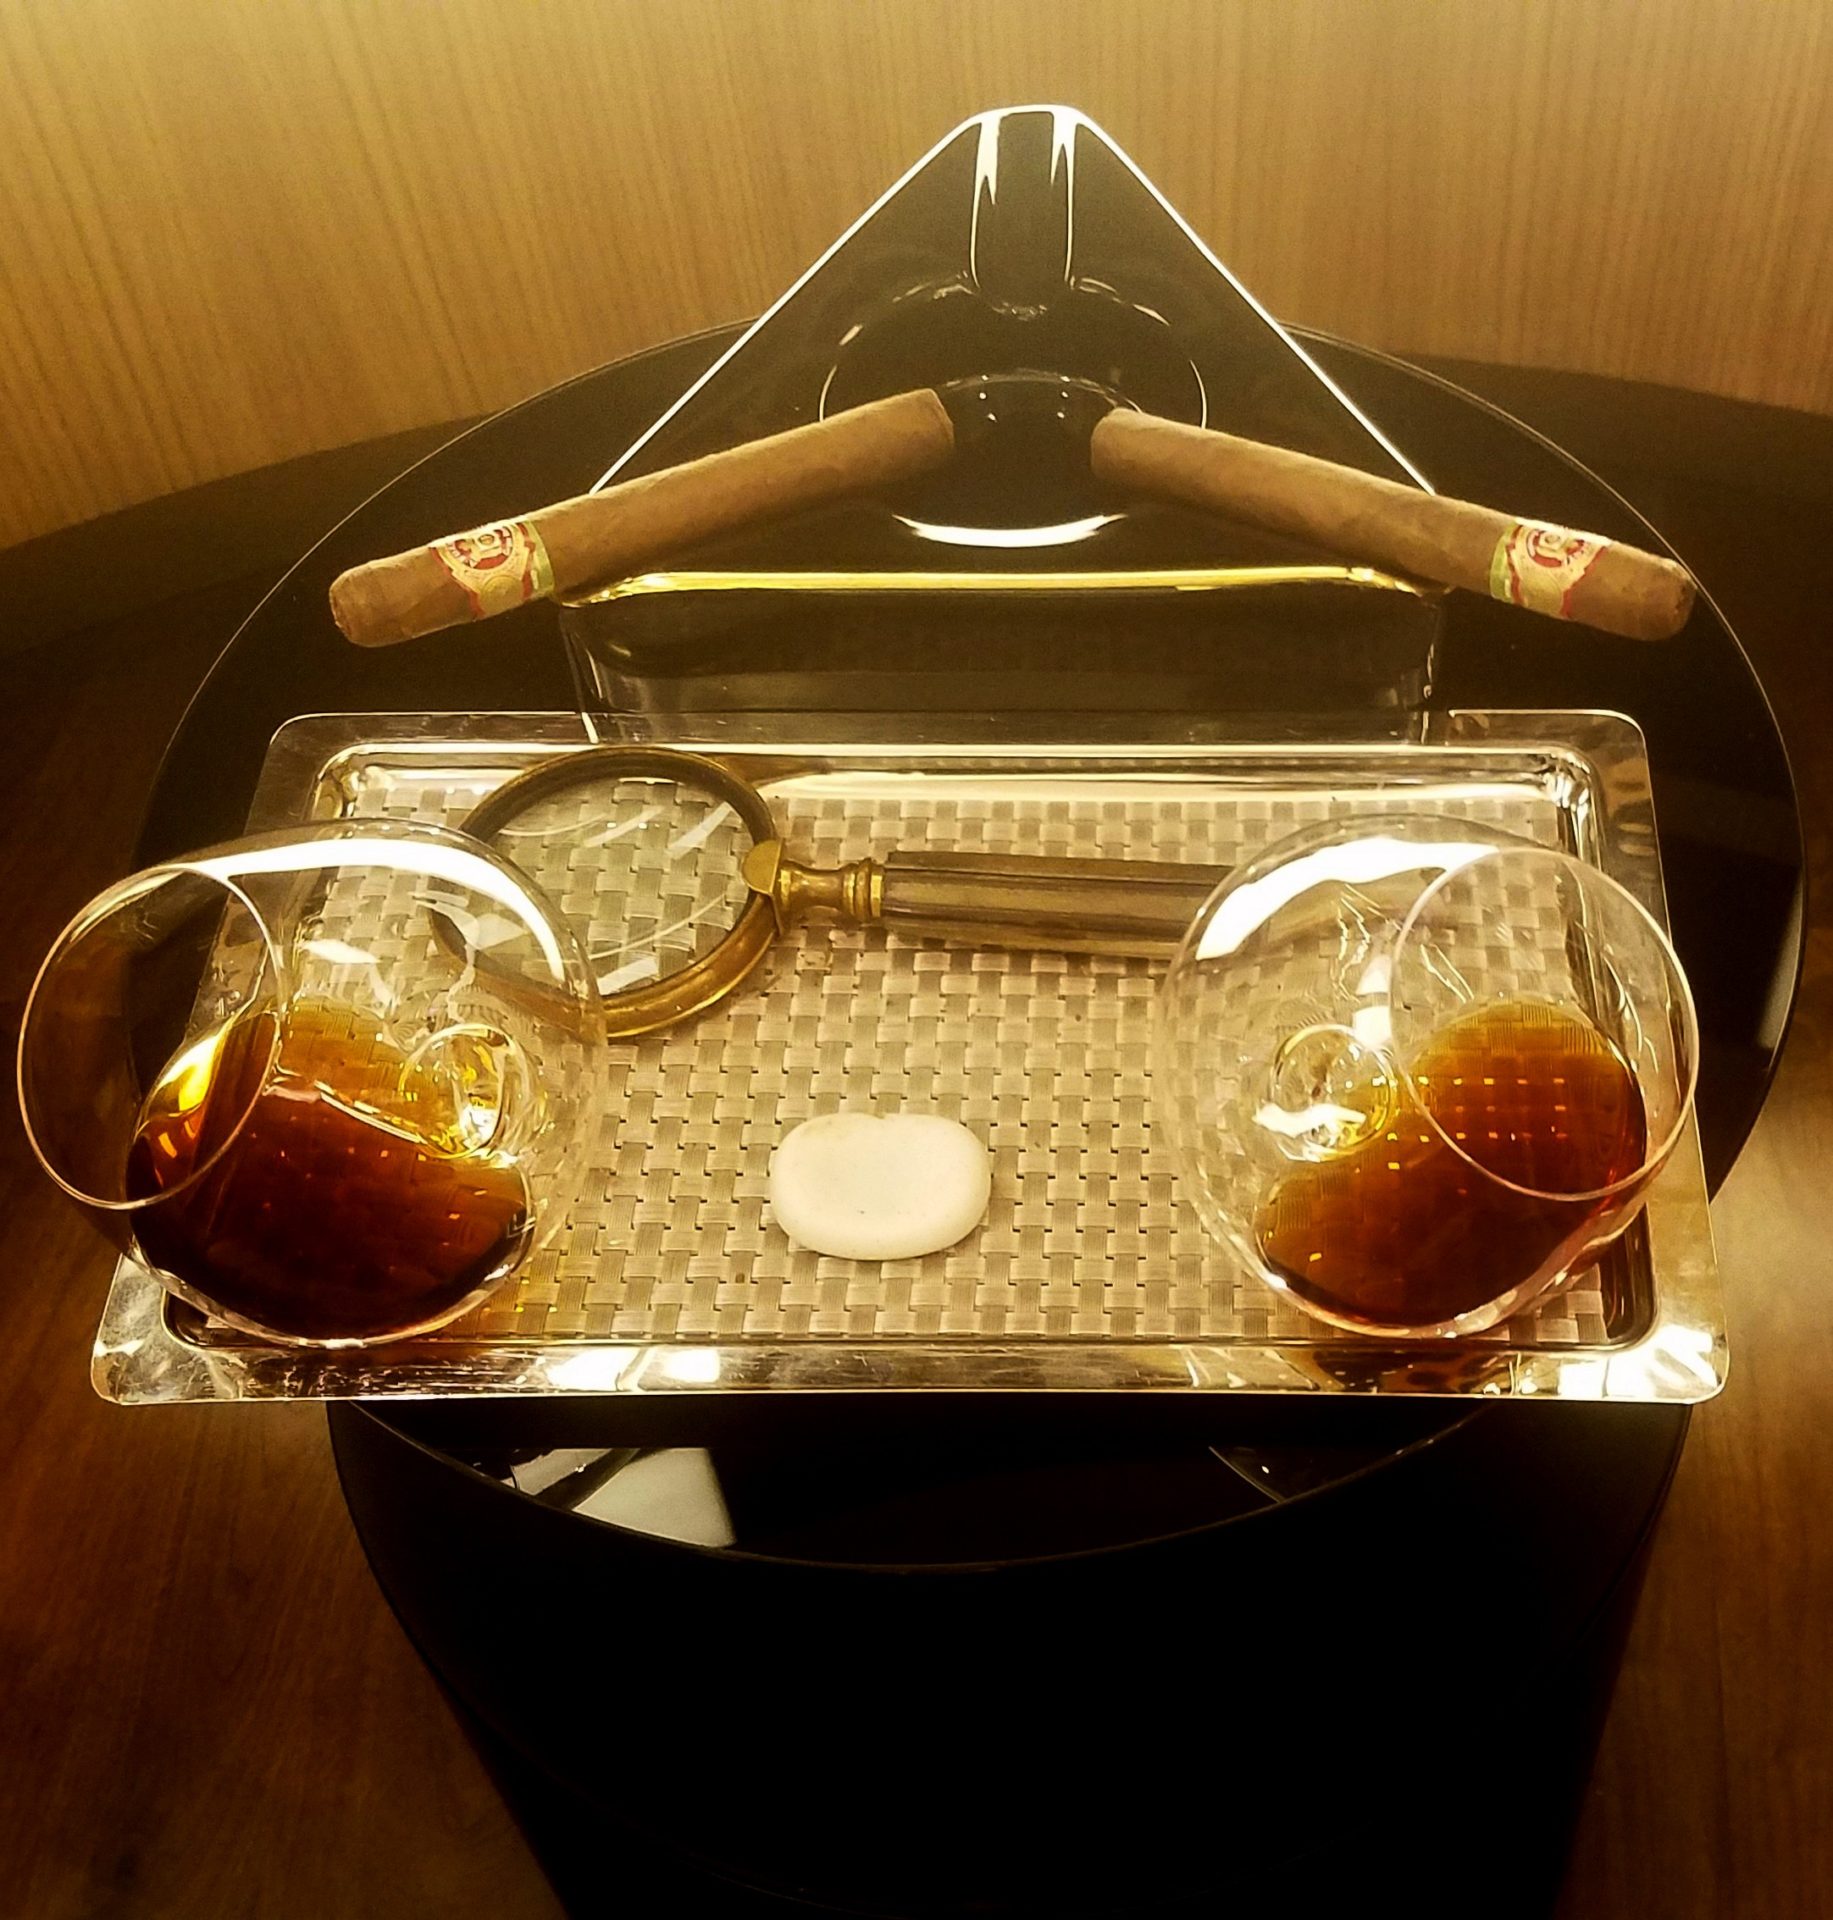 a cigars and glasses on a tray